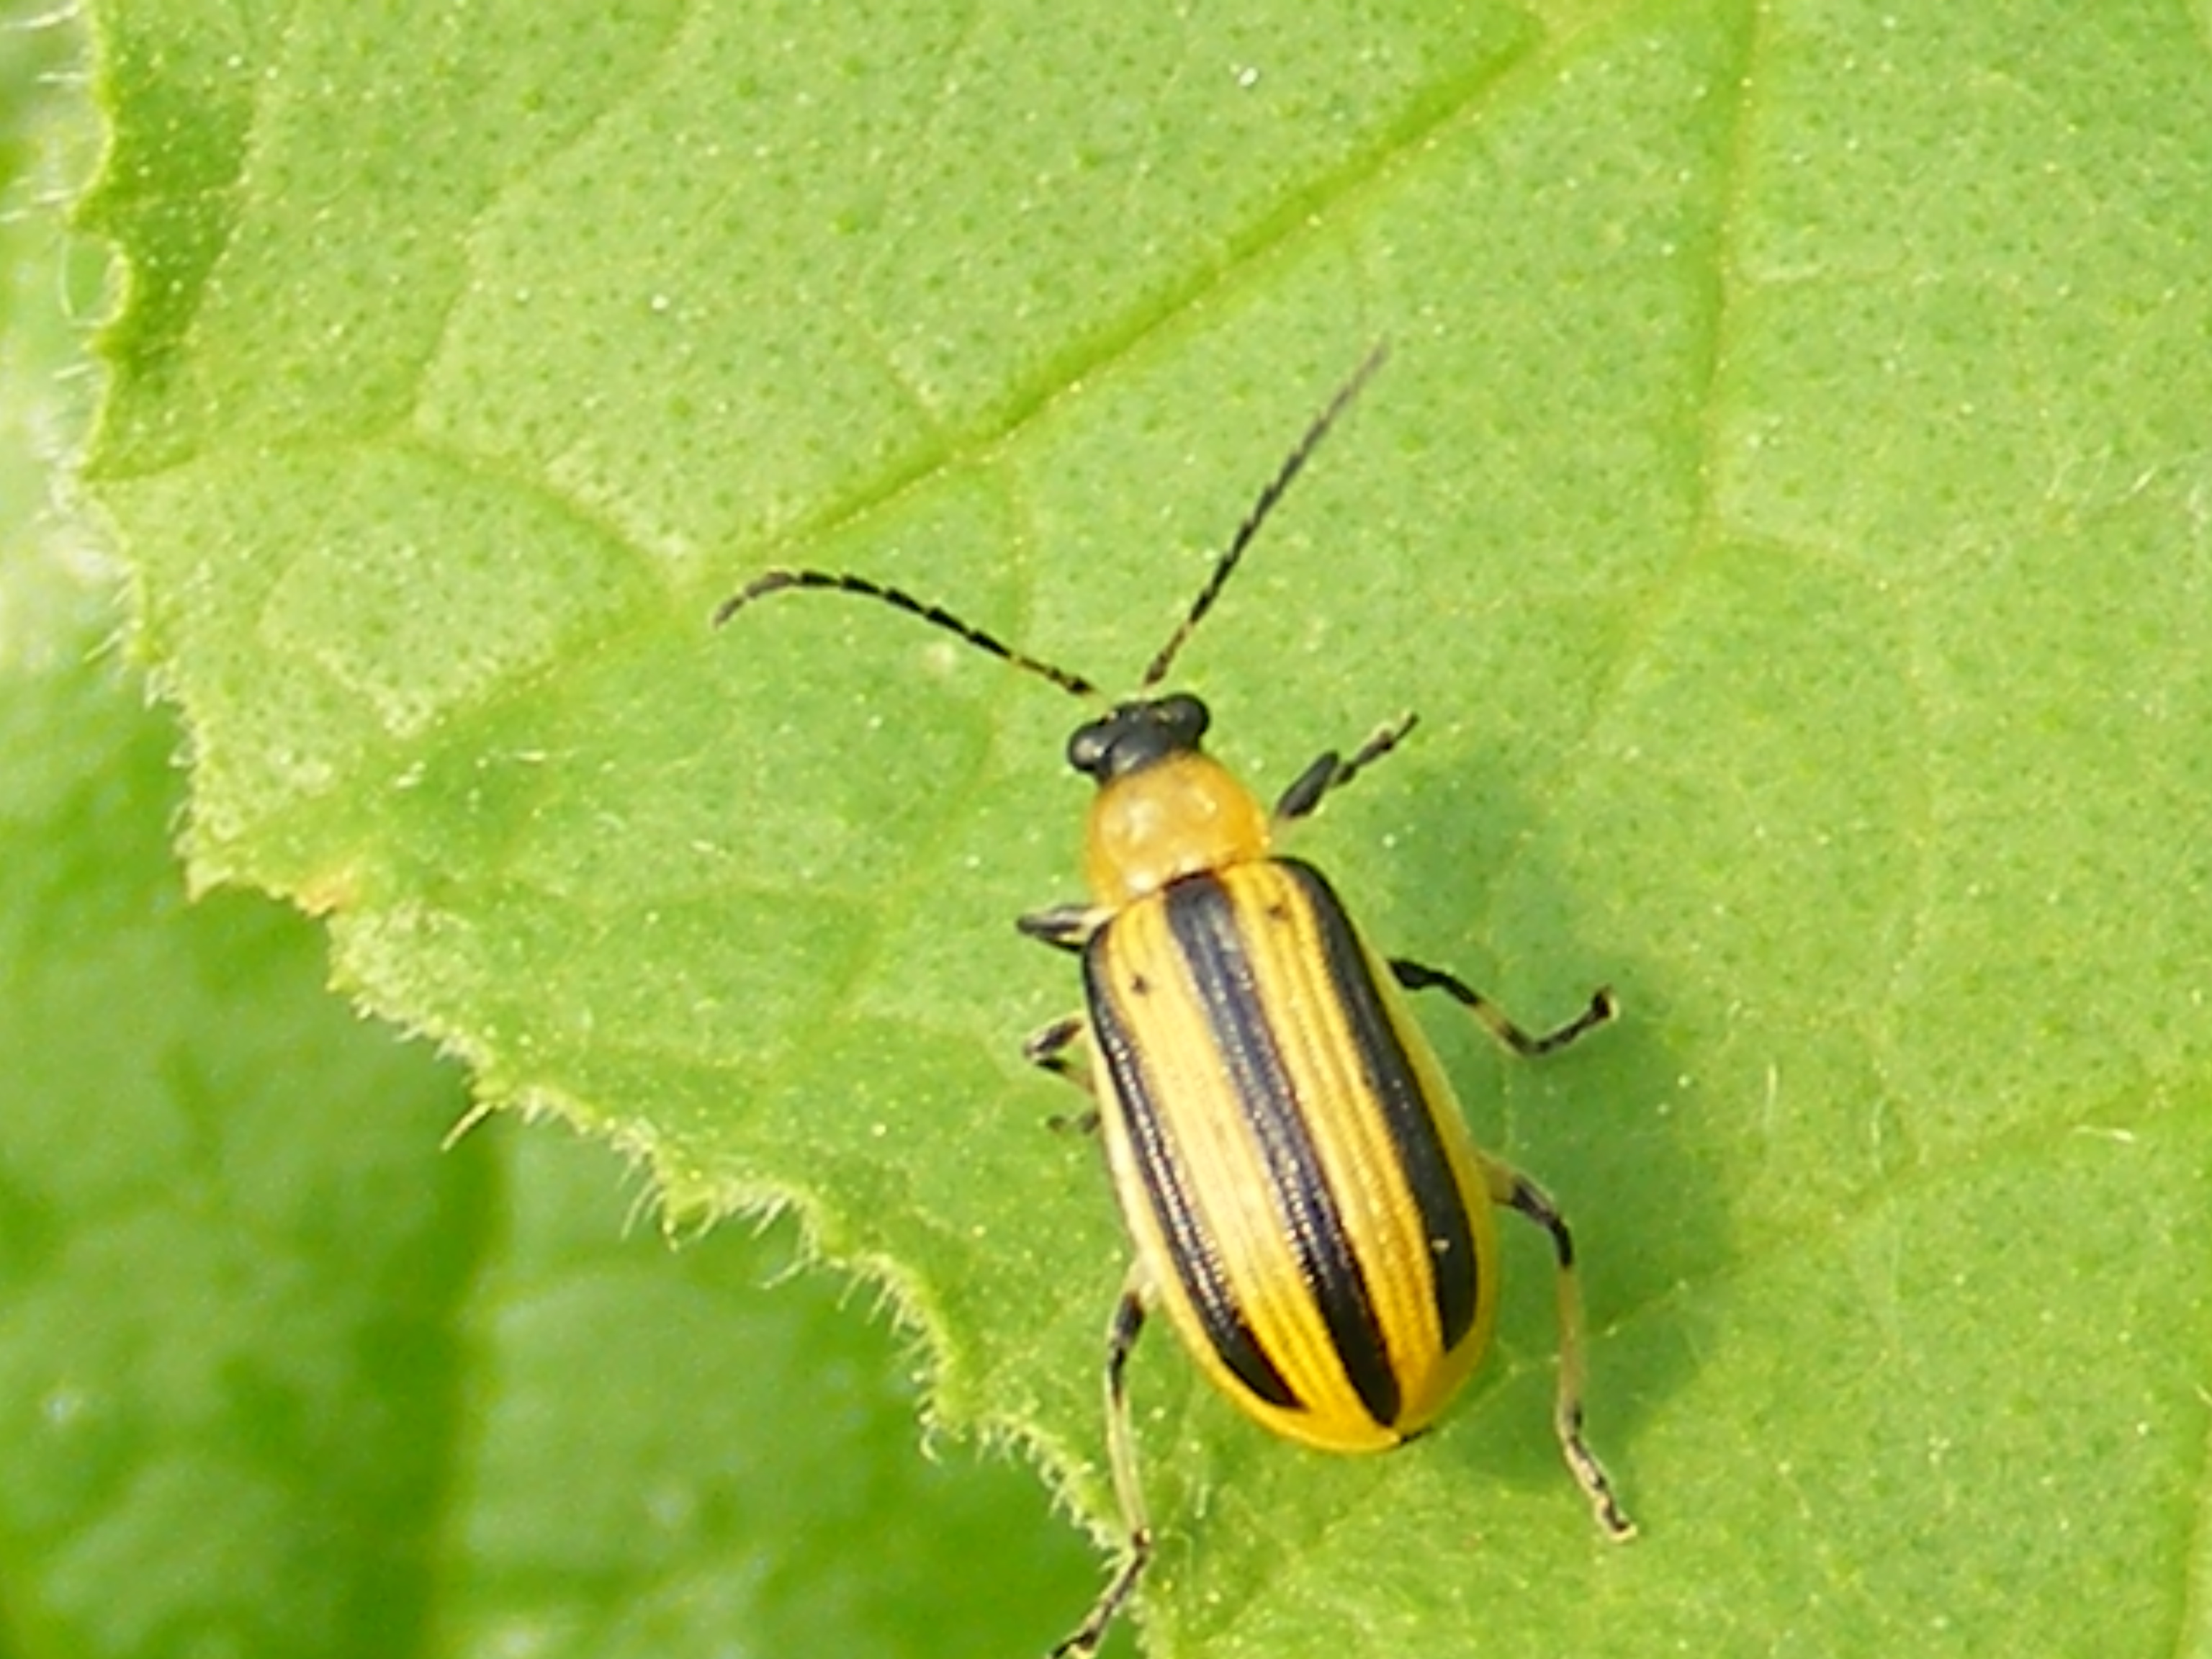 Plant-Insect Interaction: Striped cucumber beetle on yellow ...